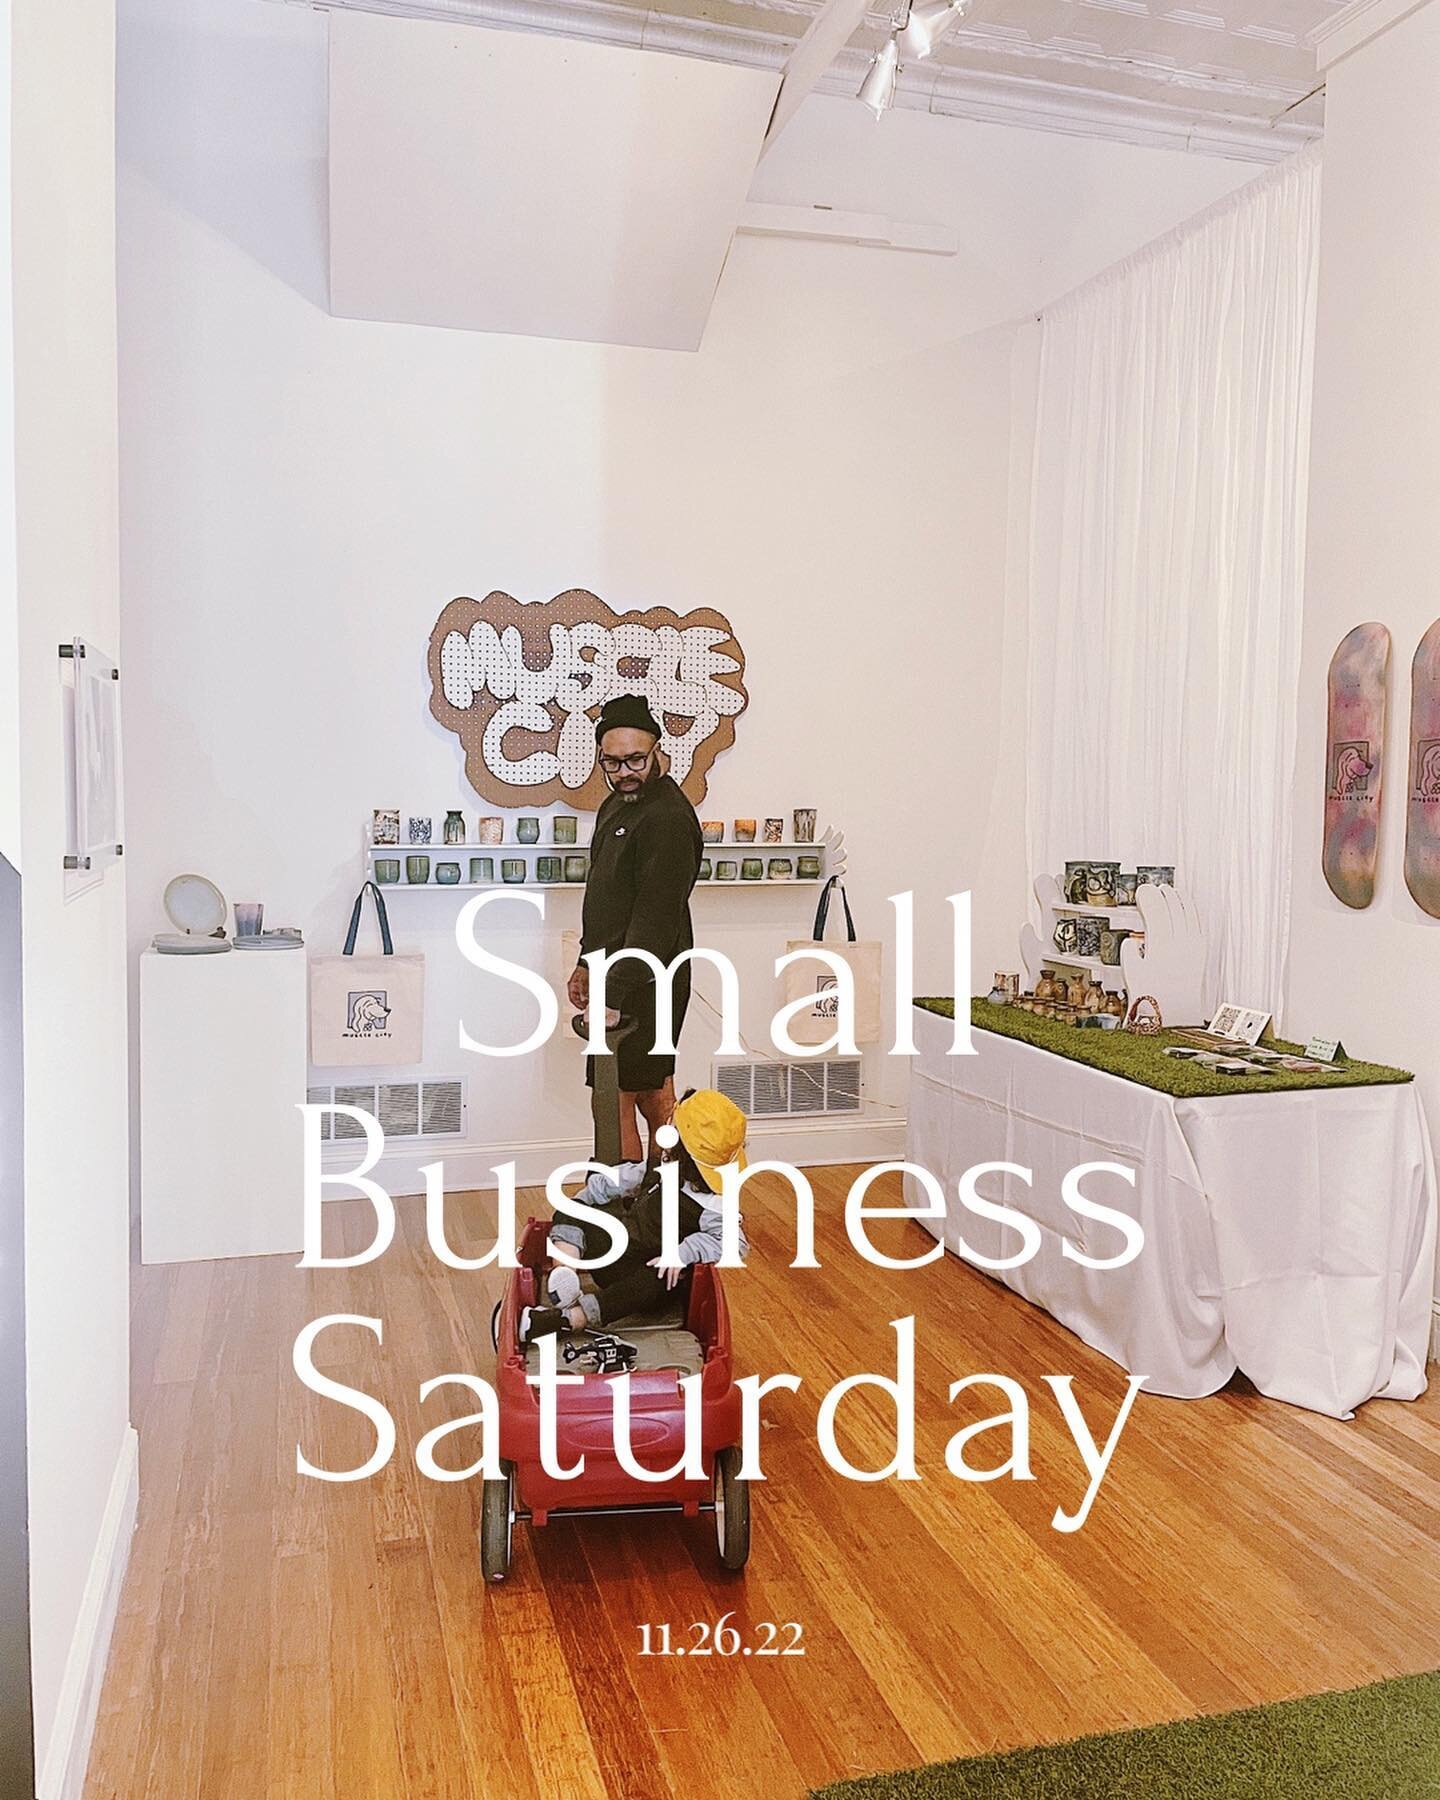 ✨It&rsquo;s Small Business Saturday!✨

Come out and support the artists of Seeds in the main Westobou Gallery and the work of @musclecity and his Muscle City Flea Market pop-up in the Micro Gallery! Give an incredible gift this season and  purchase a